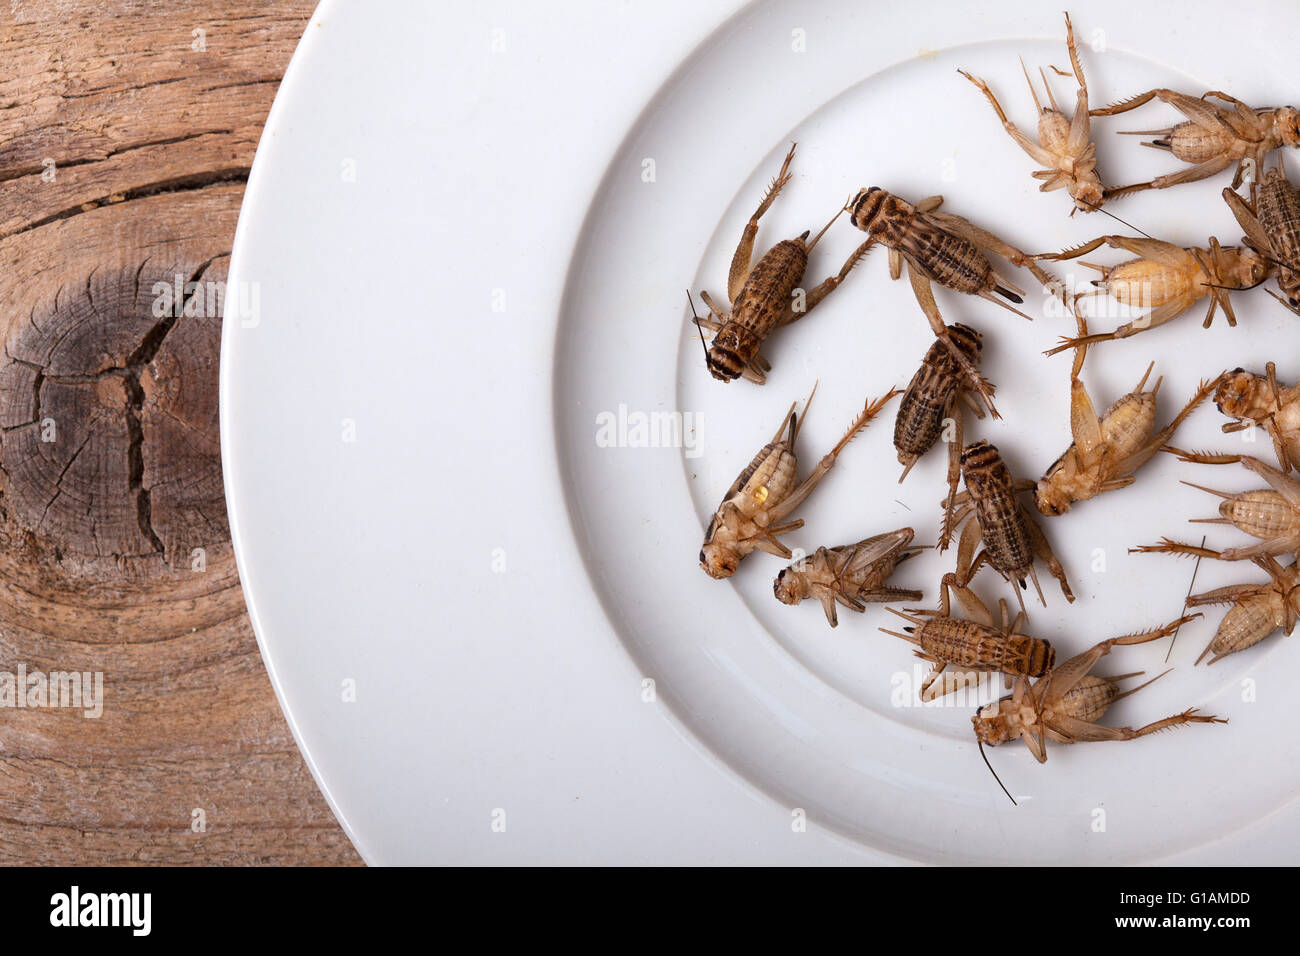 Frozen House Crickets to be used as pet food Stock Photo